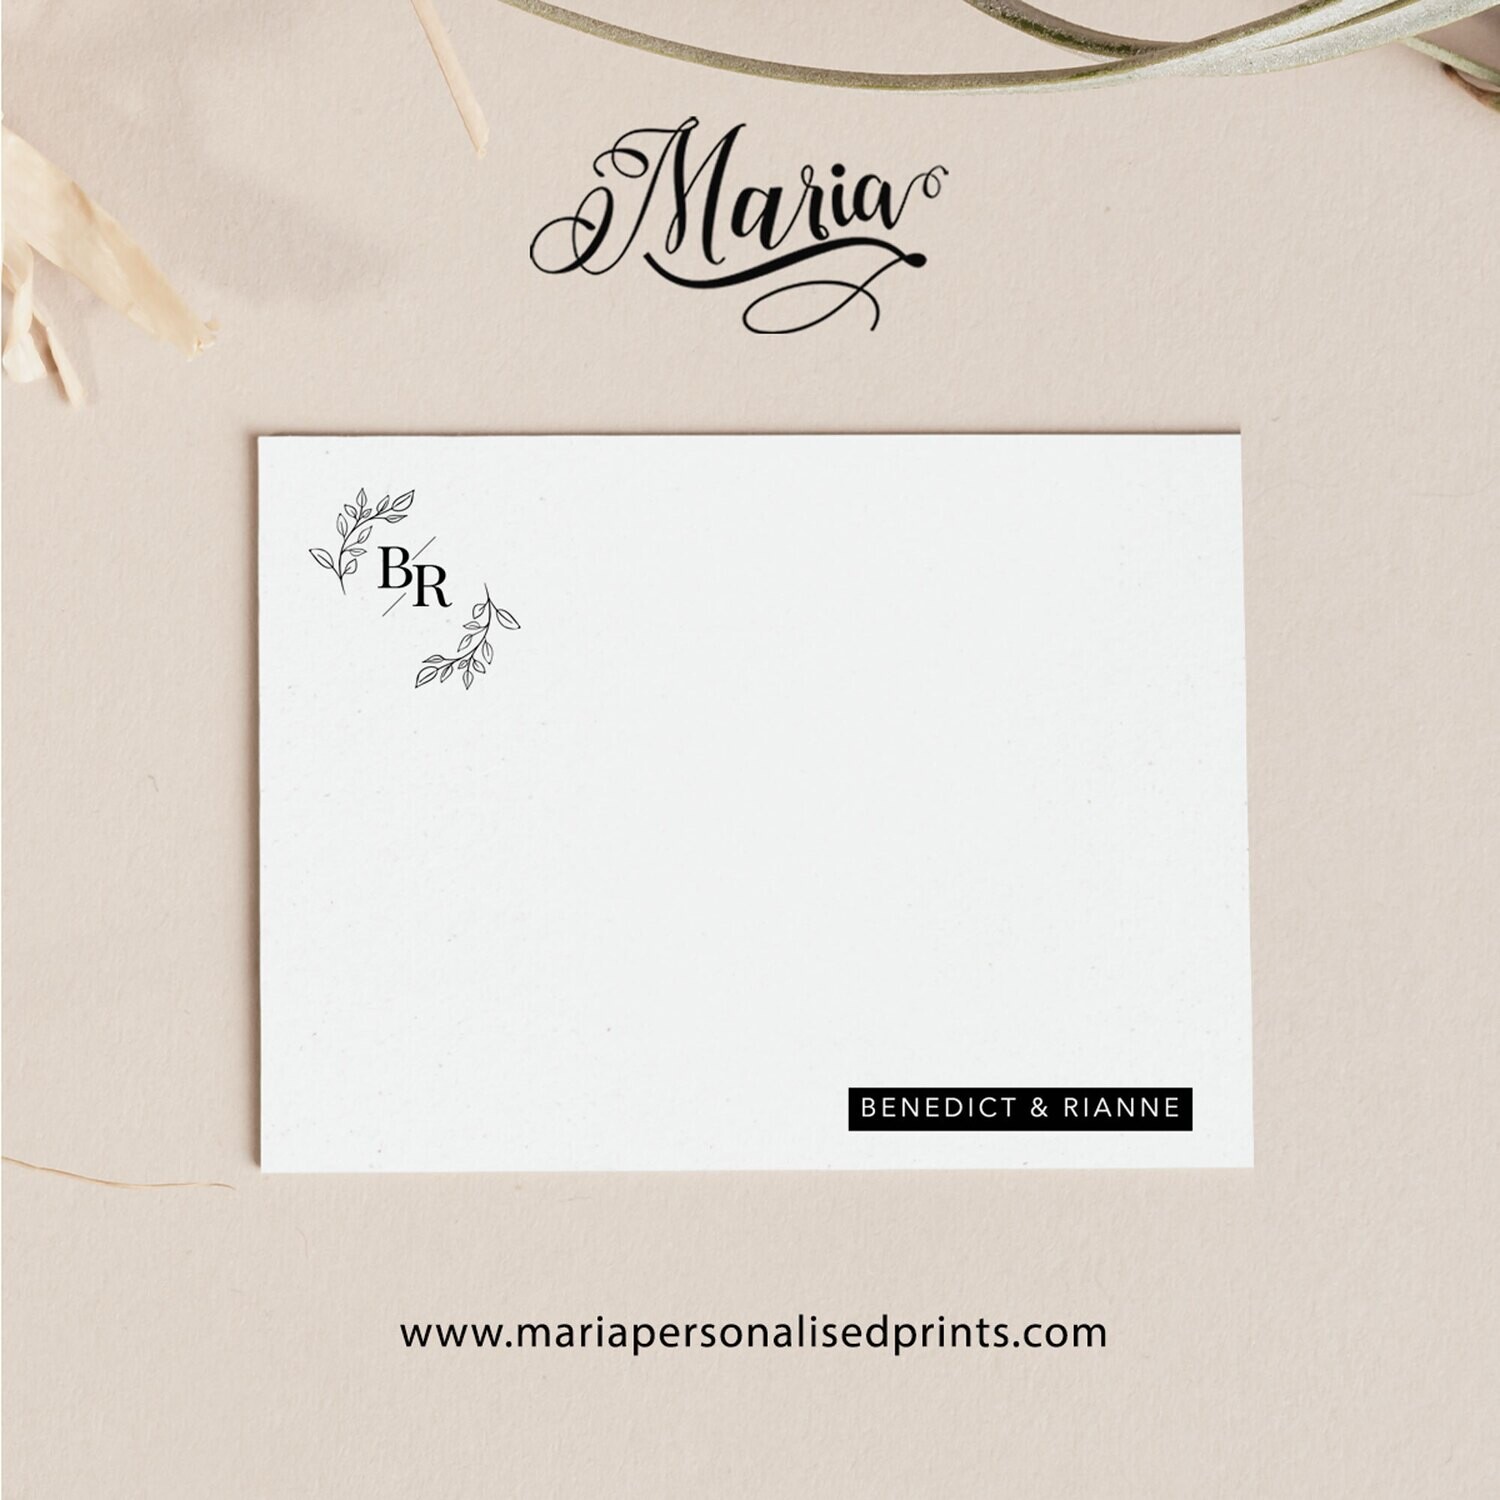 Personalized Note Cards MONOGRAM NC018